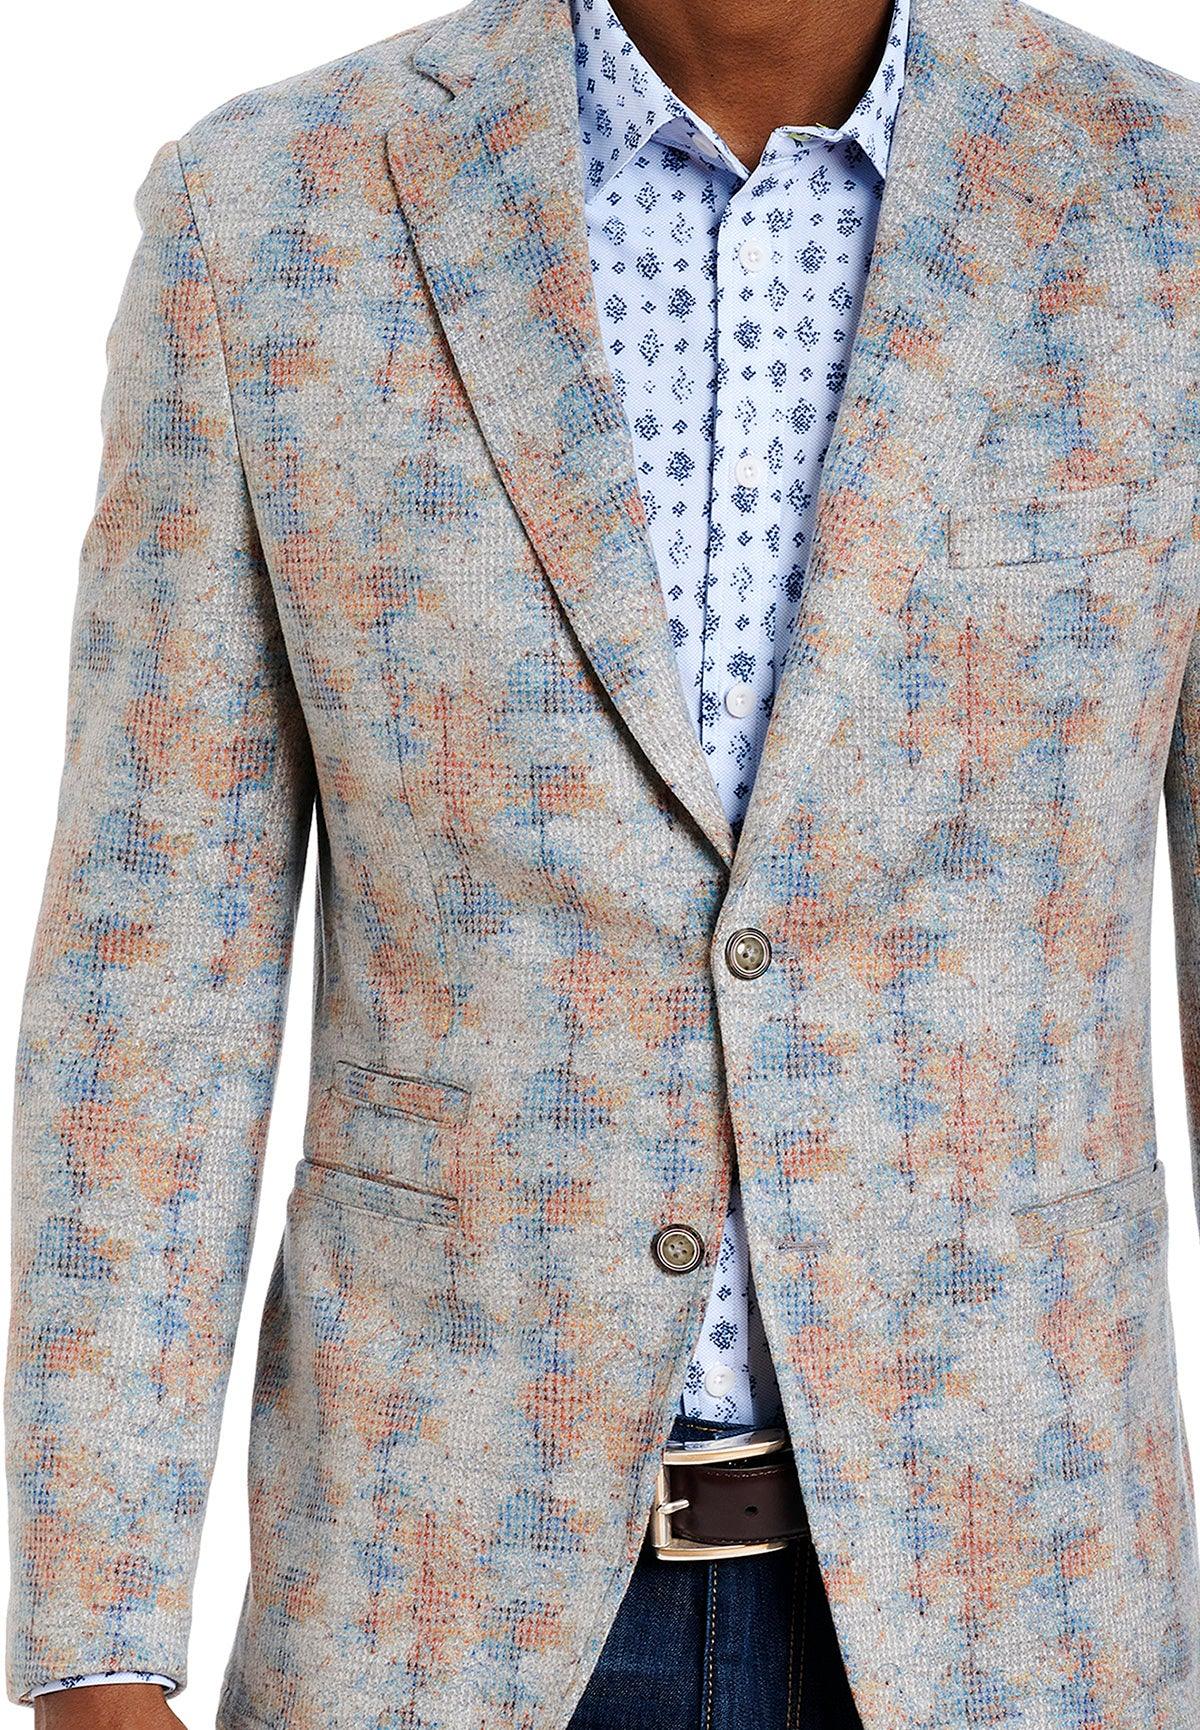 Robert Graham Velour Colors Sport Coat  Part of the Robert Graham exclusive sport collection. Abstract tonal colors add depth. Partial lining, signature Graham detailing inside and out. Modern Fit for a slim to medium build.